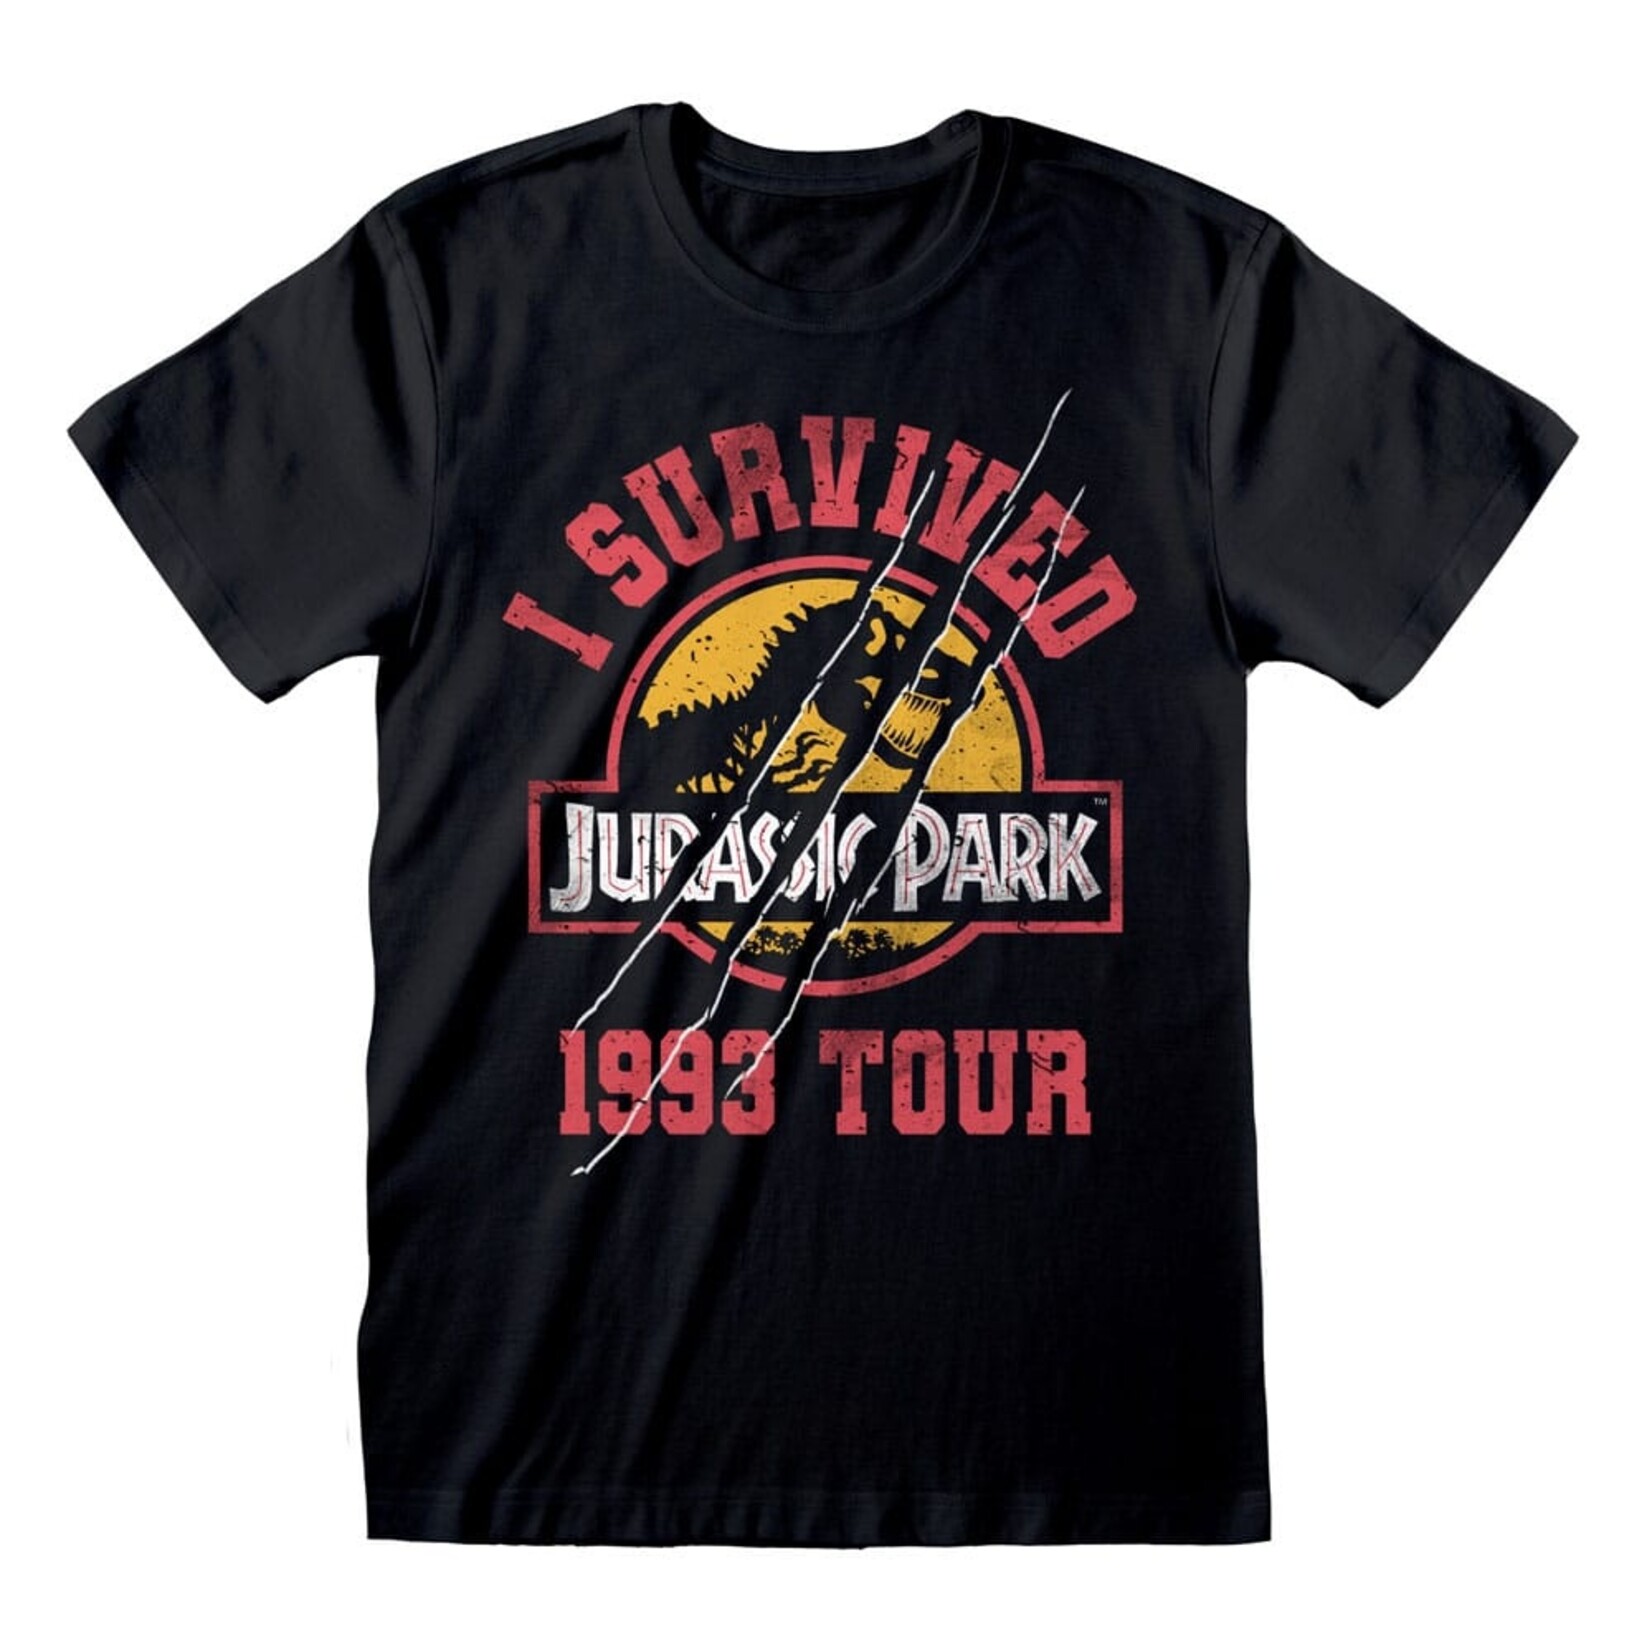 Heroes Inc Heroes Inc Jurassic Park T-Shirt I Survived 1993